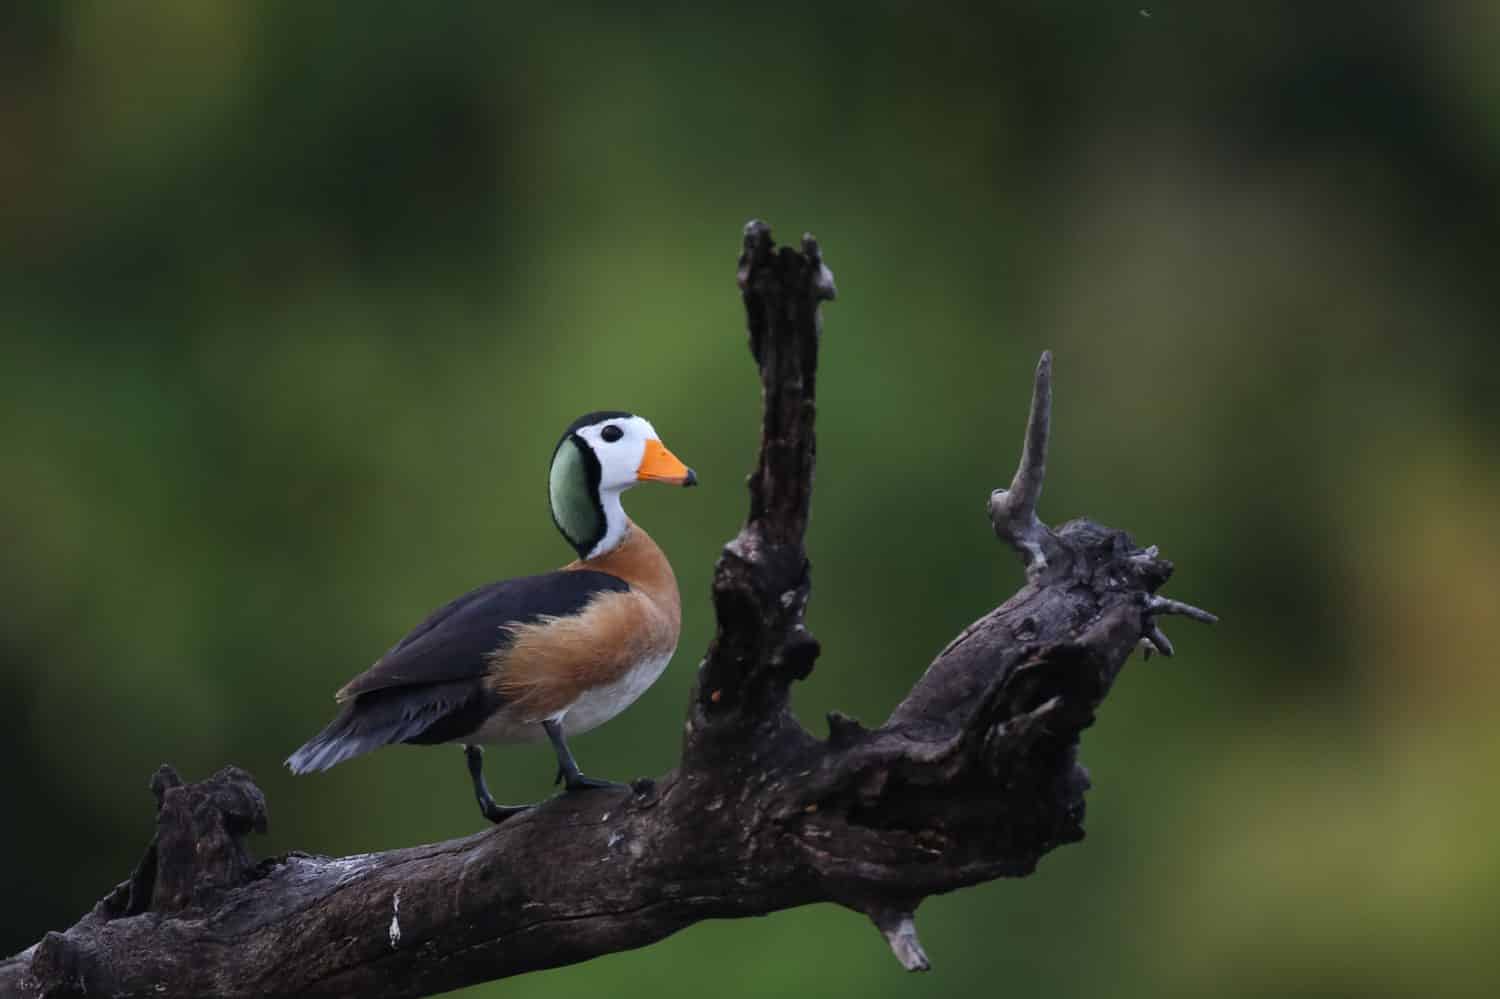 Pygmy goose standing on large tree branch